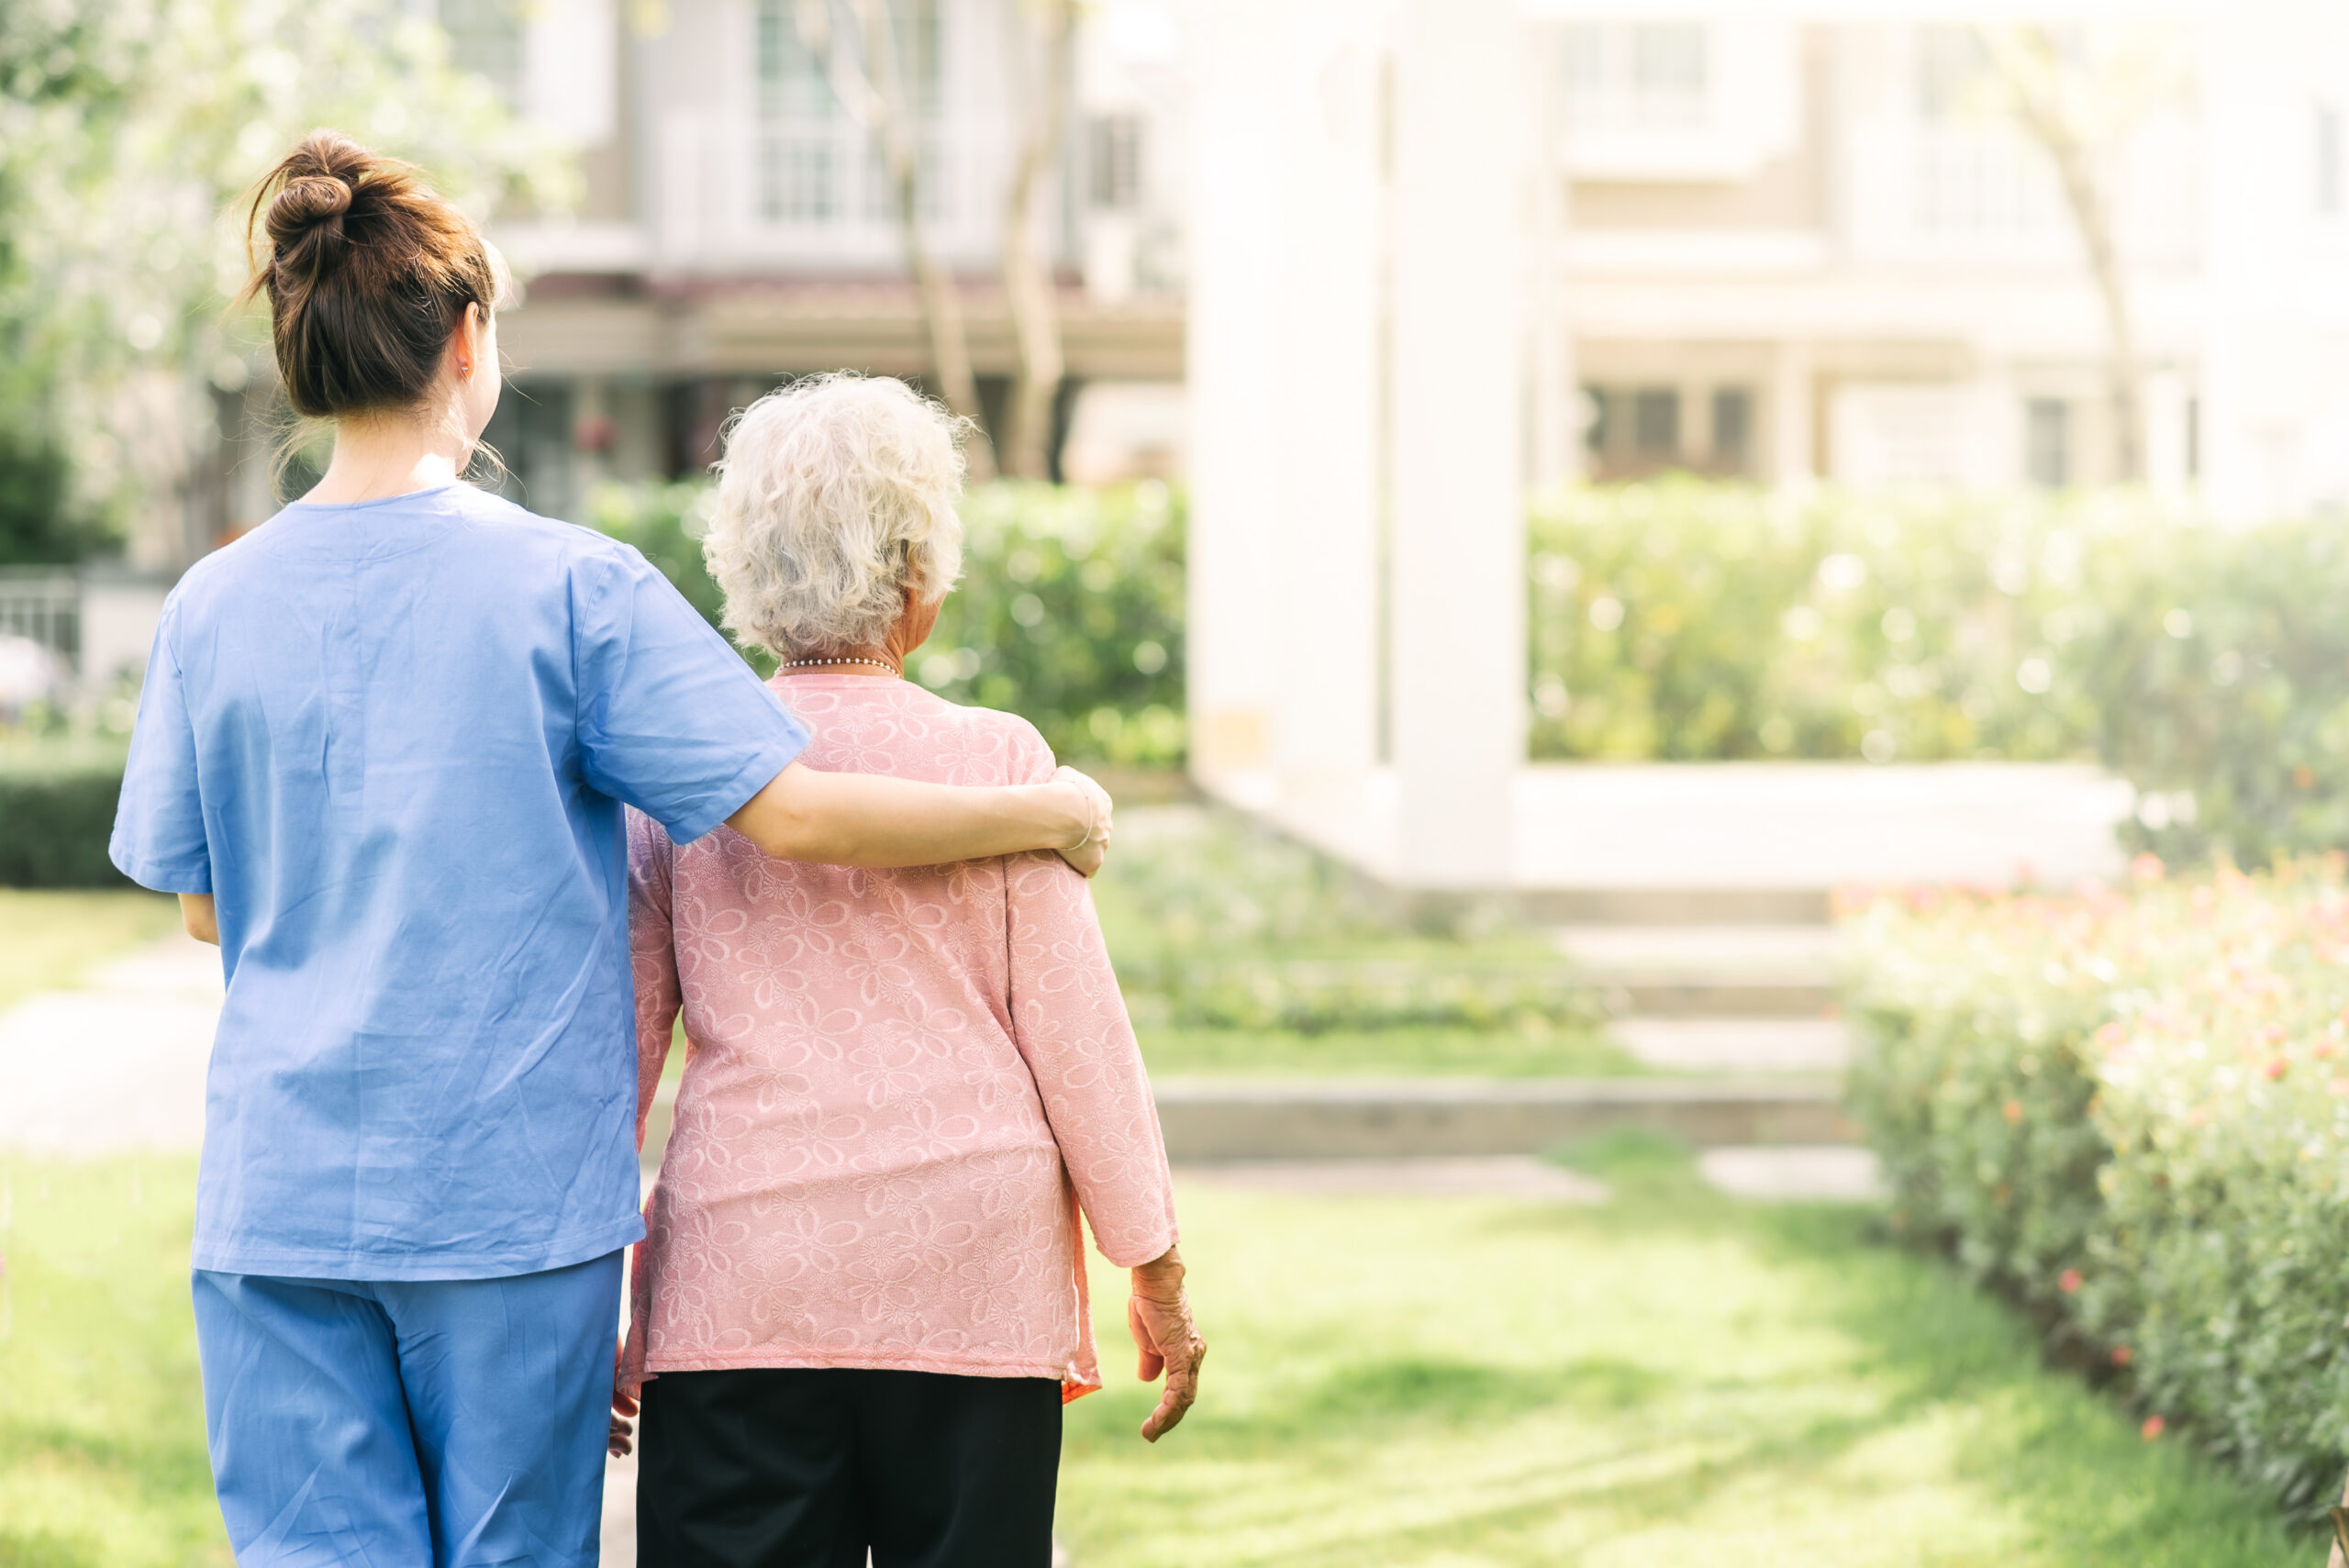 A caregiver walks with an elderly woman outside, surrounded by greenery and sunshine.